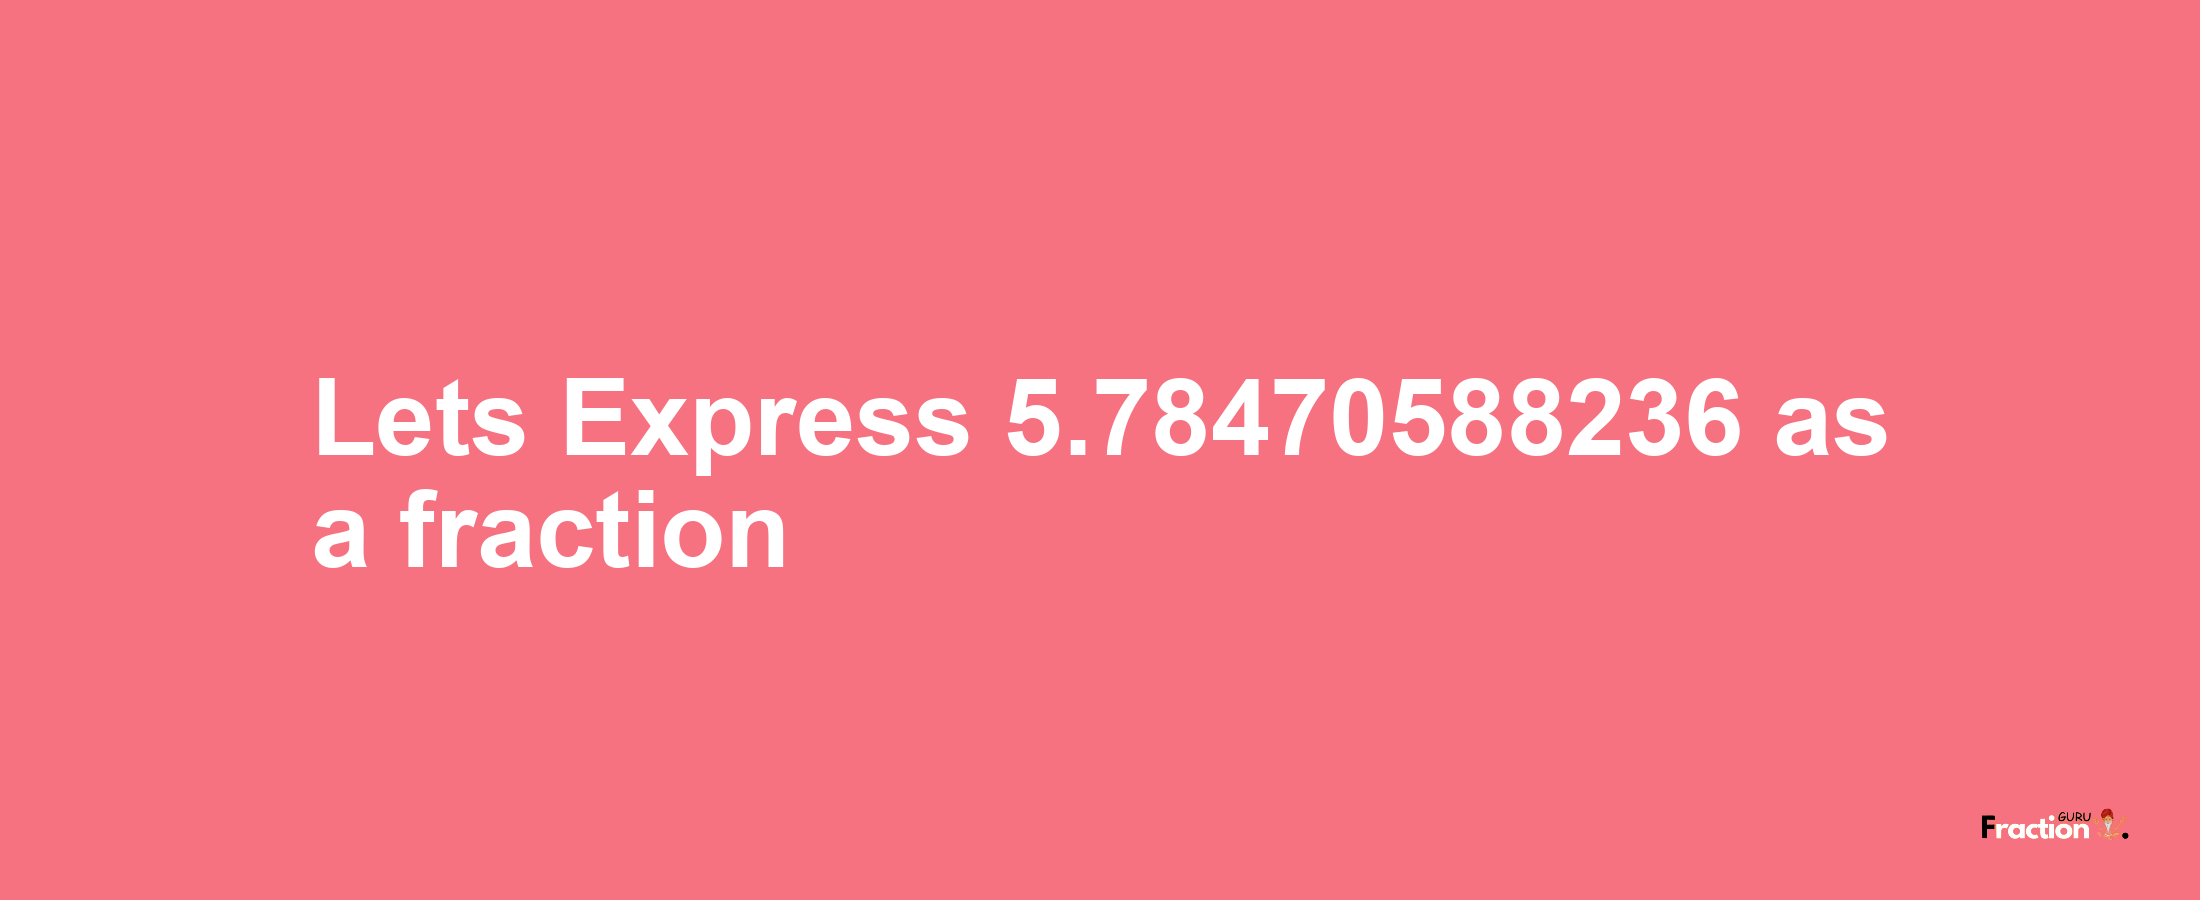 Lets Express 5.78470588236 as afraction